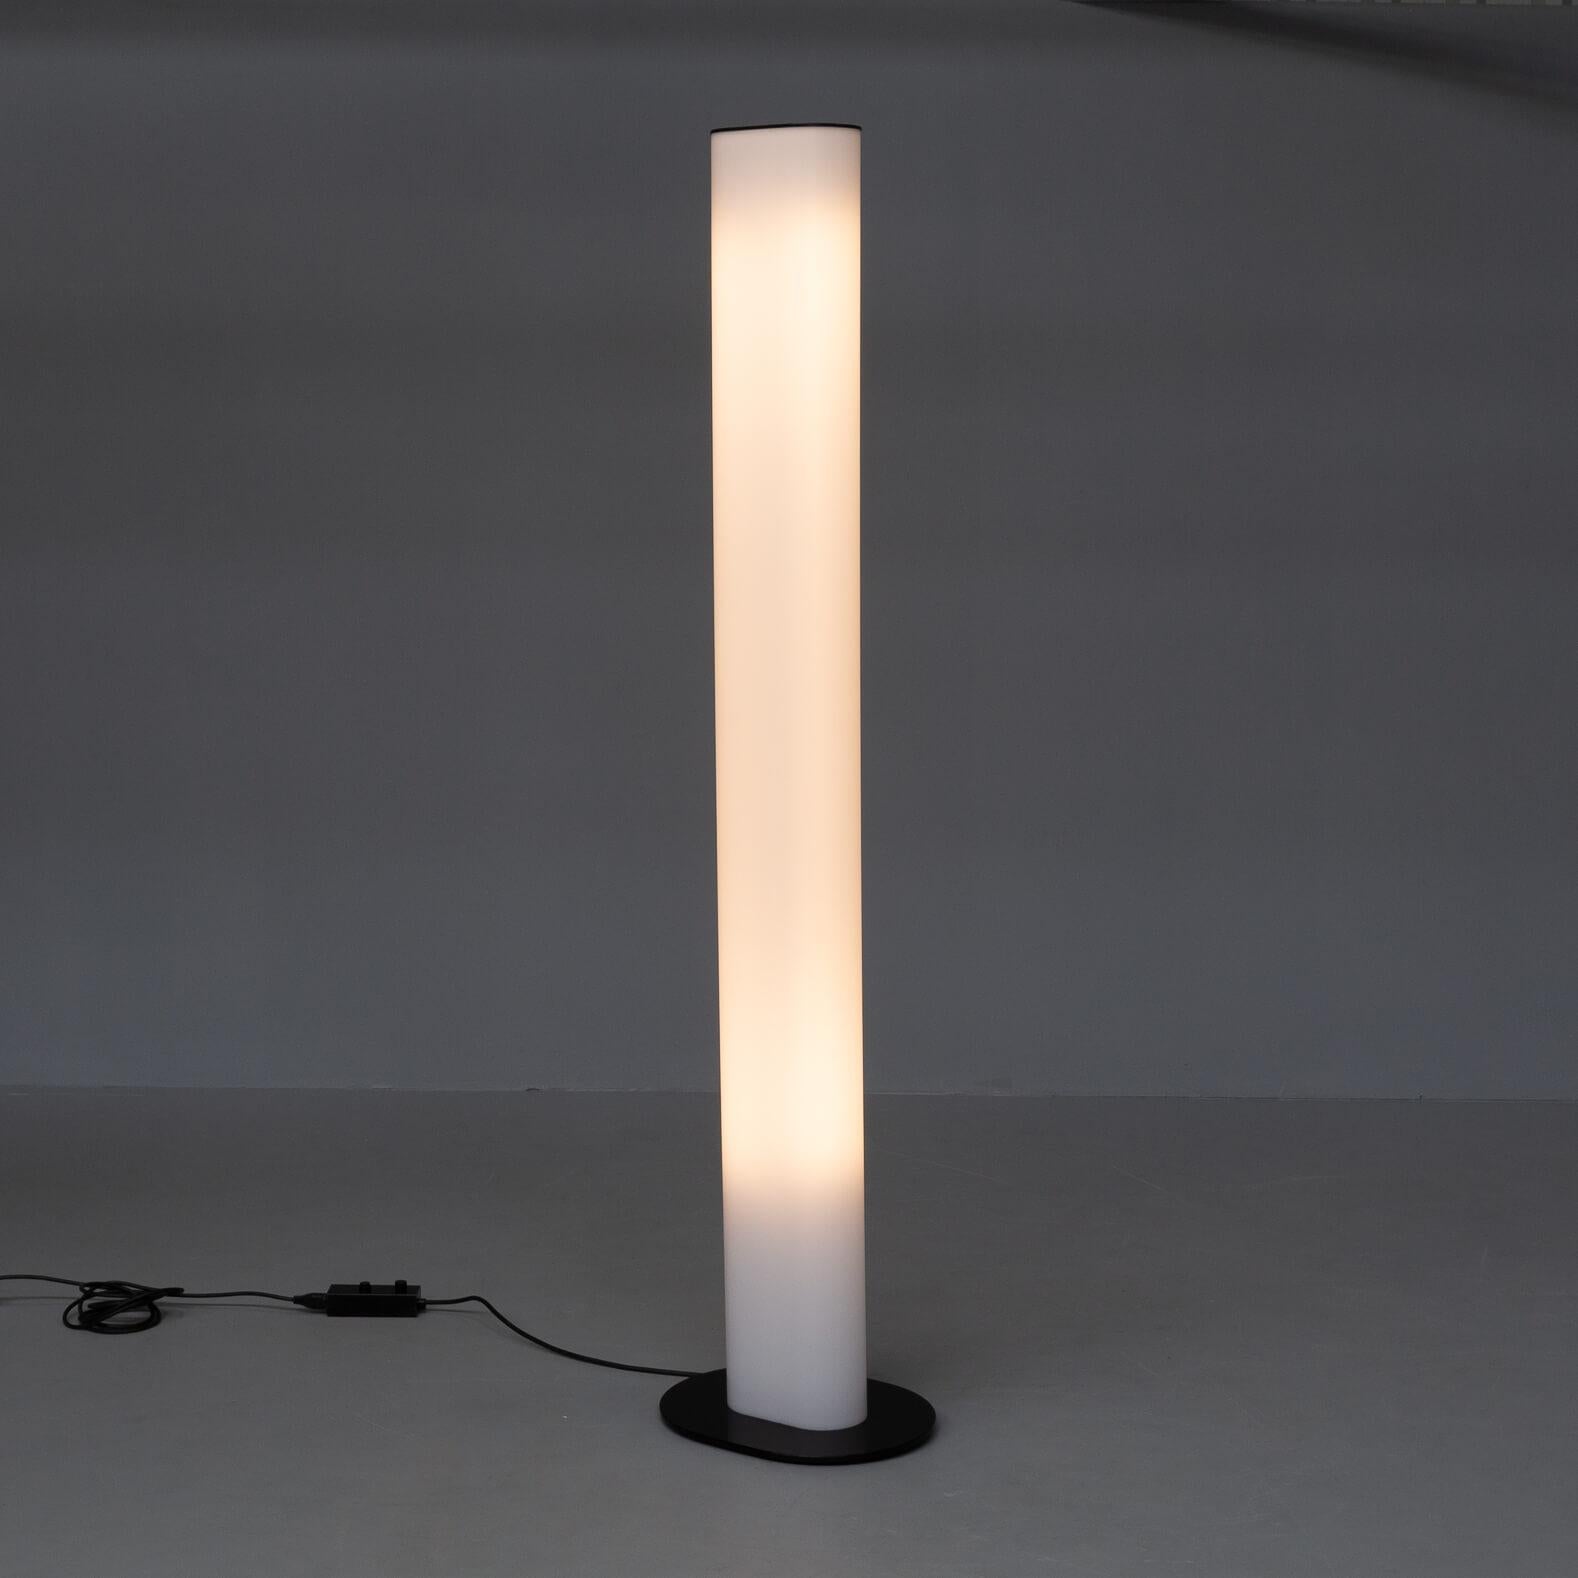 The belux leia lamp family reflects modern minimalism deeply rooted in Japanese culture. The sober shape and the exquisite use of materials are restrained and therefore adapt to any room. The warm, energy-saving light creates a pleasant atmosphere.